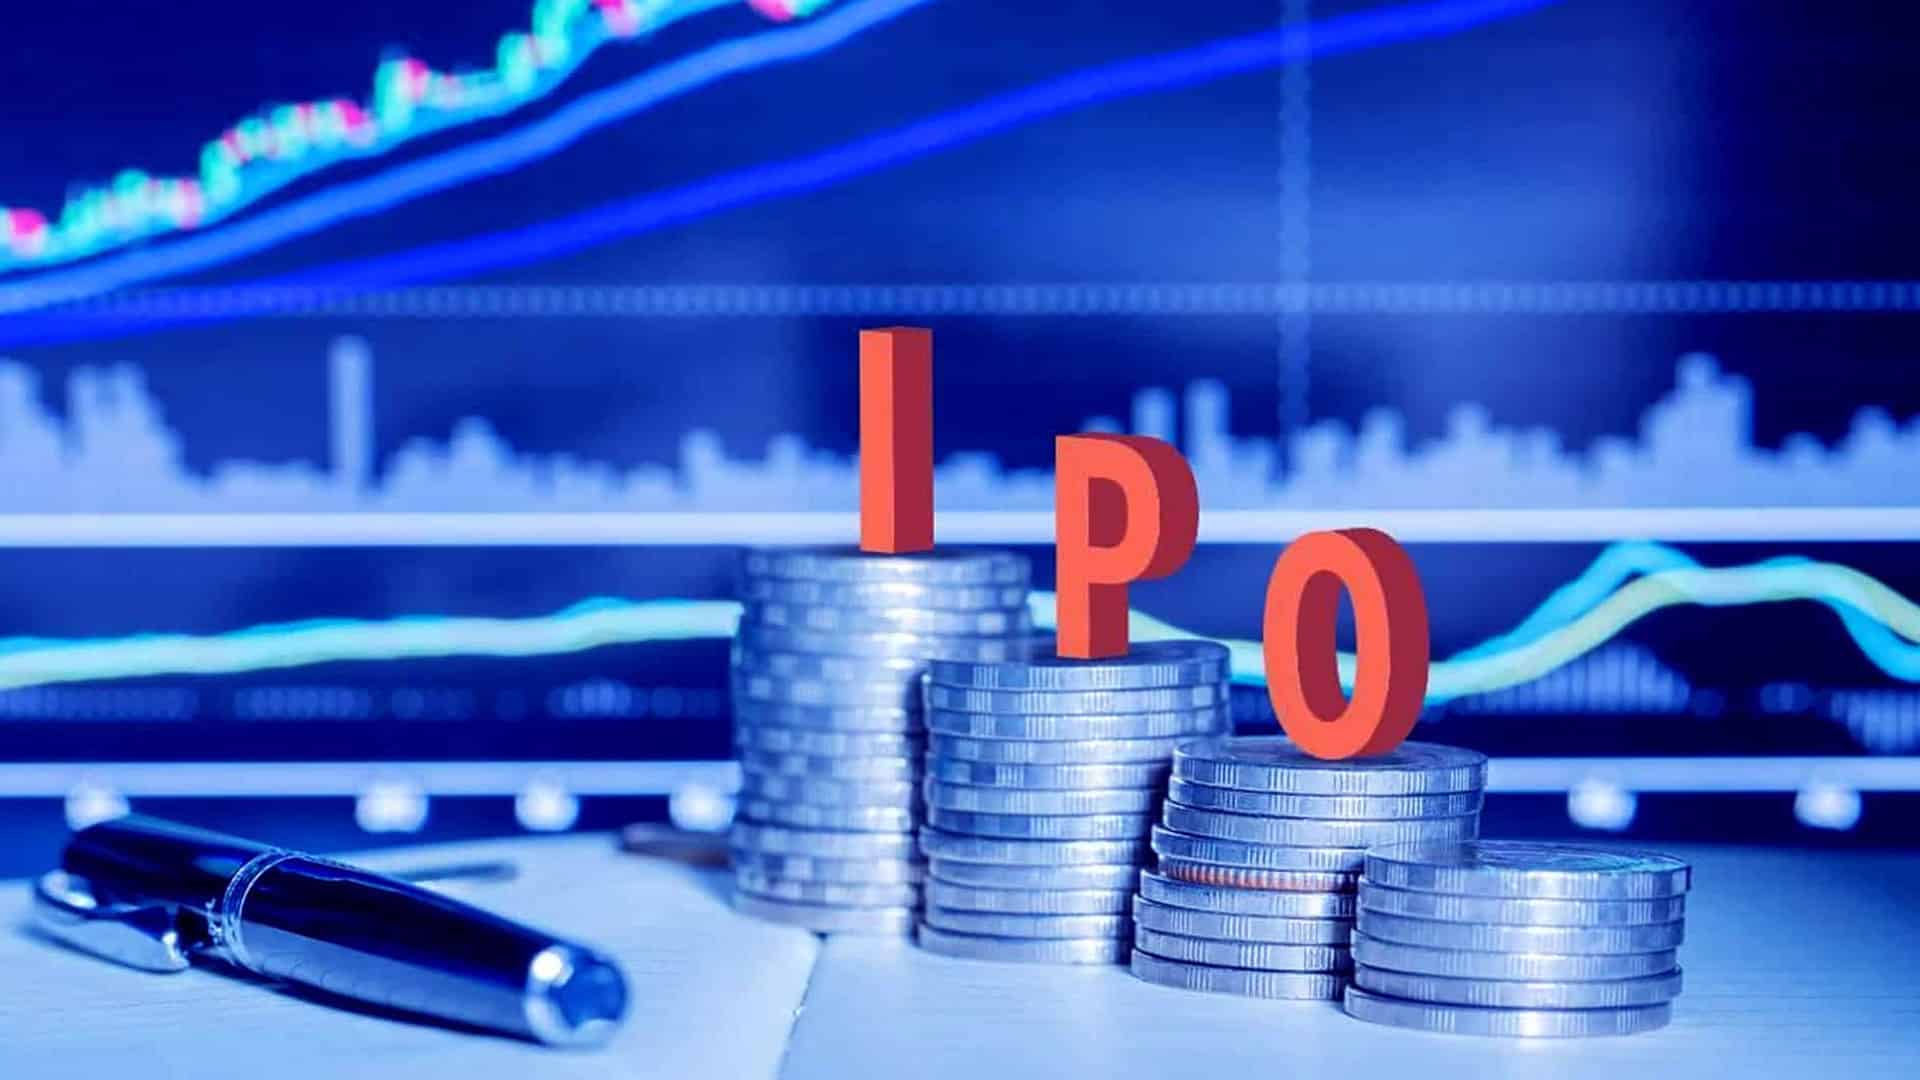 Pencil maker DOMS Industries files Rs 1,200 cr IPO papers with Sebi